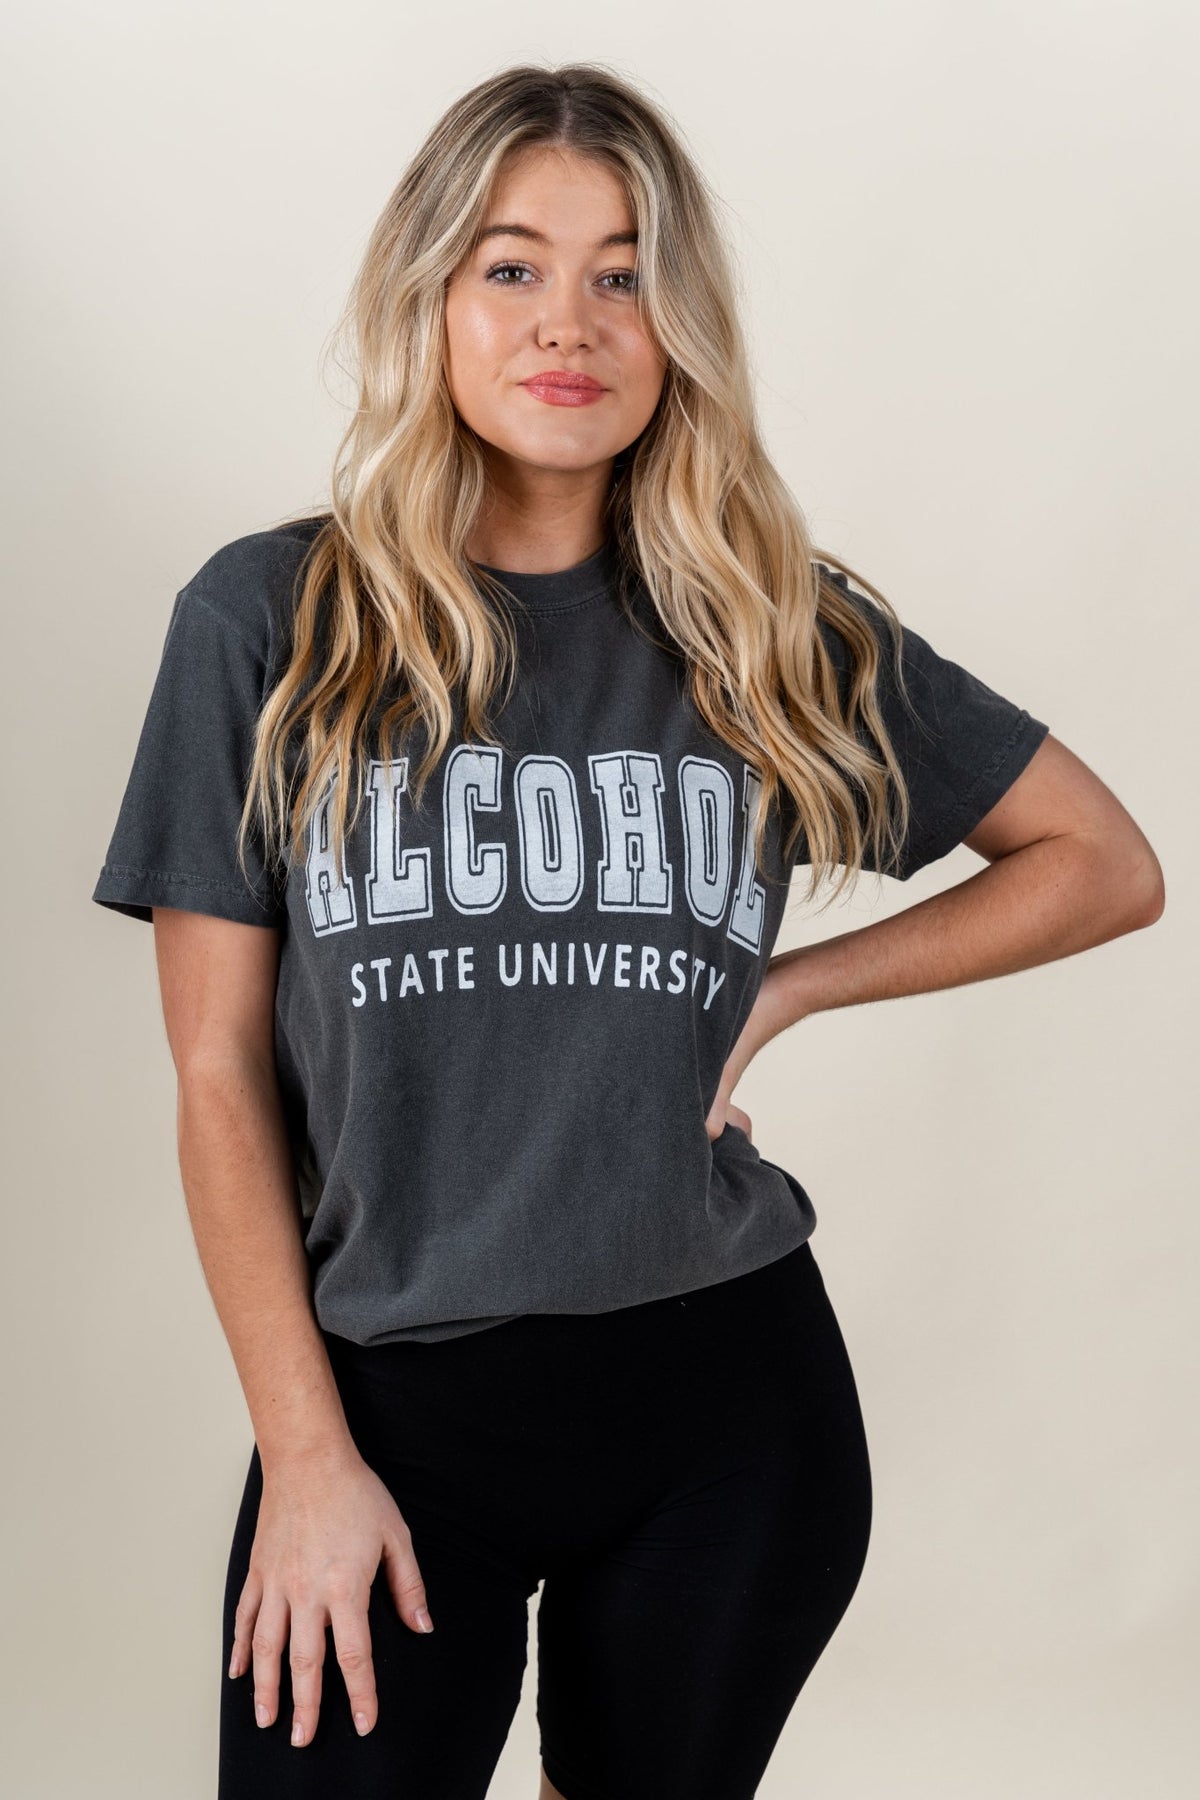 Alcohol state t-shirt grey - Cute T-shirt - Trendy Graphic T-Shirts at Lush Fashion Lounge Boutique in Oklahoma City